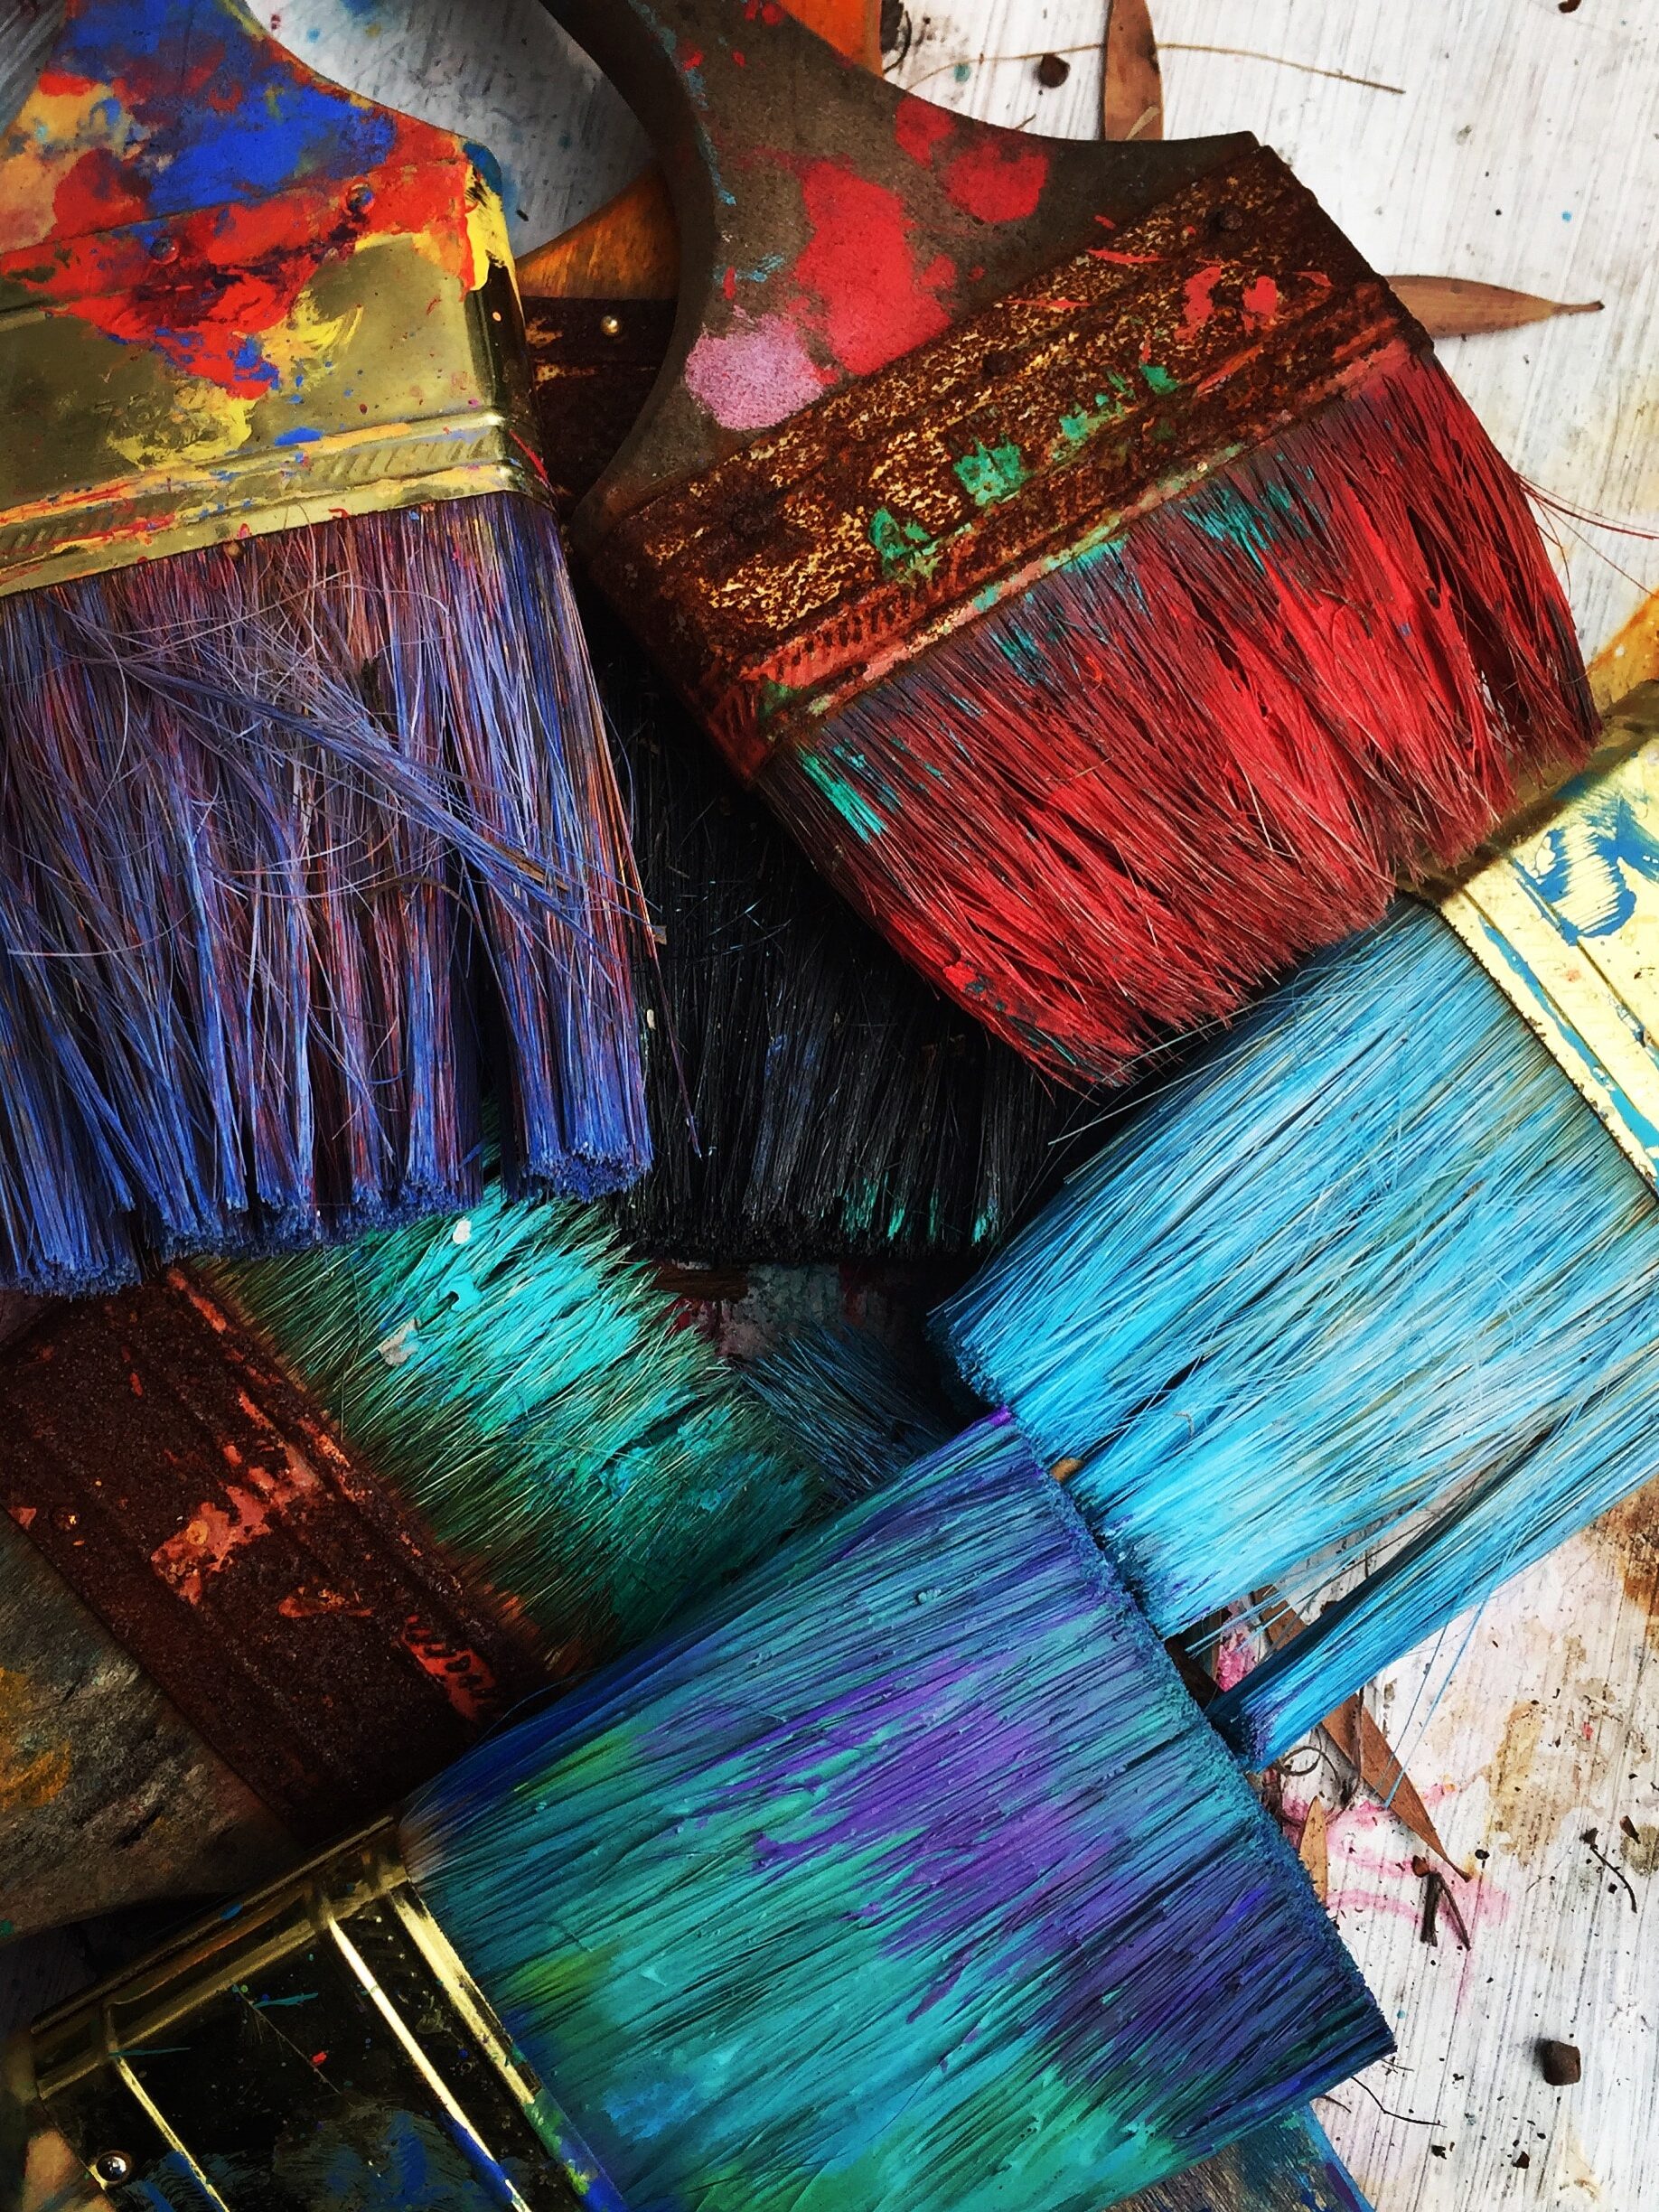 Florida Artist RhondaK paintbrushes drying. She uses colorful paint in her works on mermaids, manatees, crabs, palm trees, and more. RhondaK.art